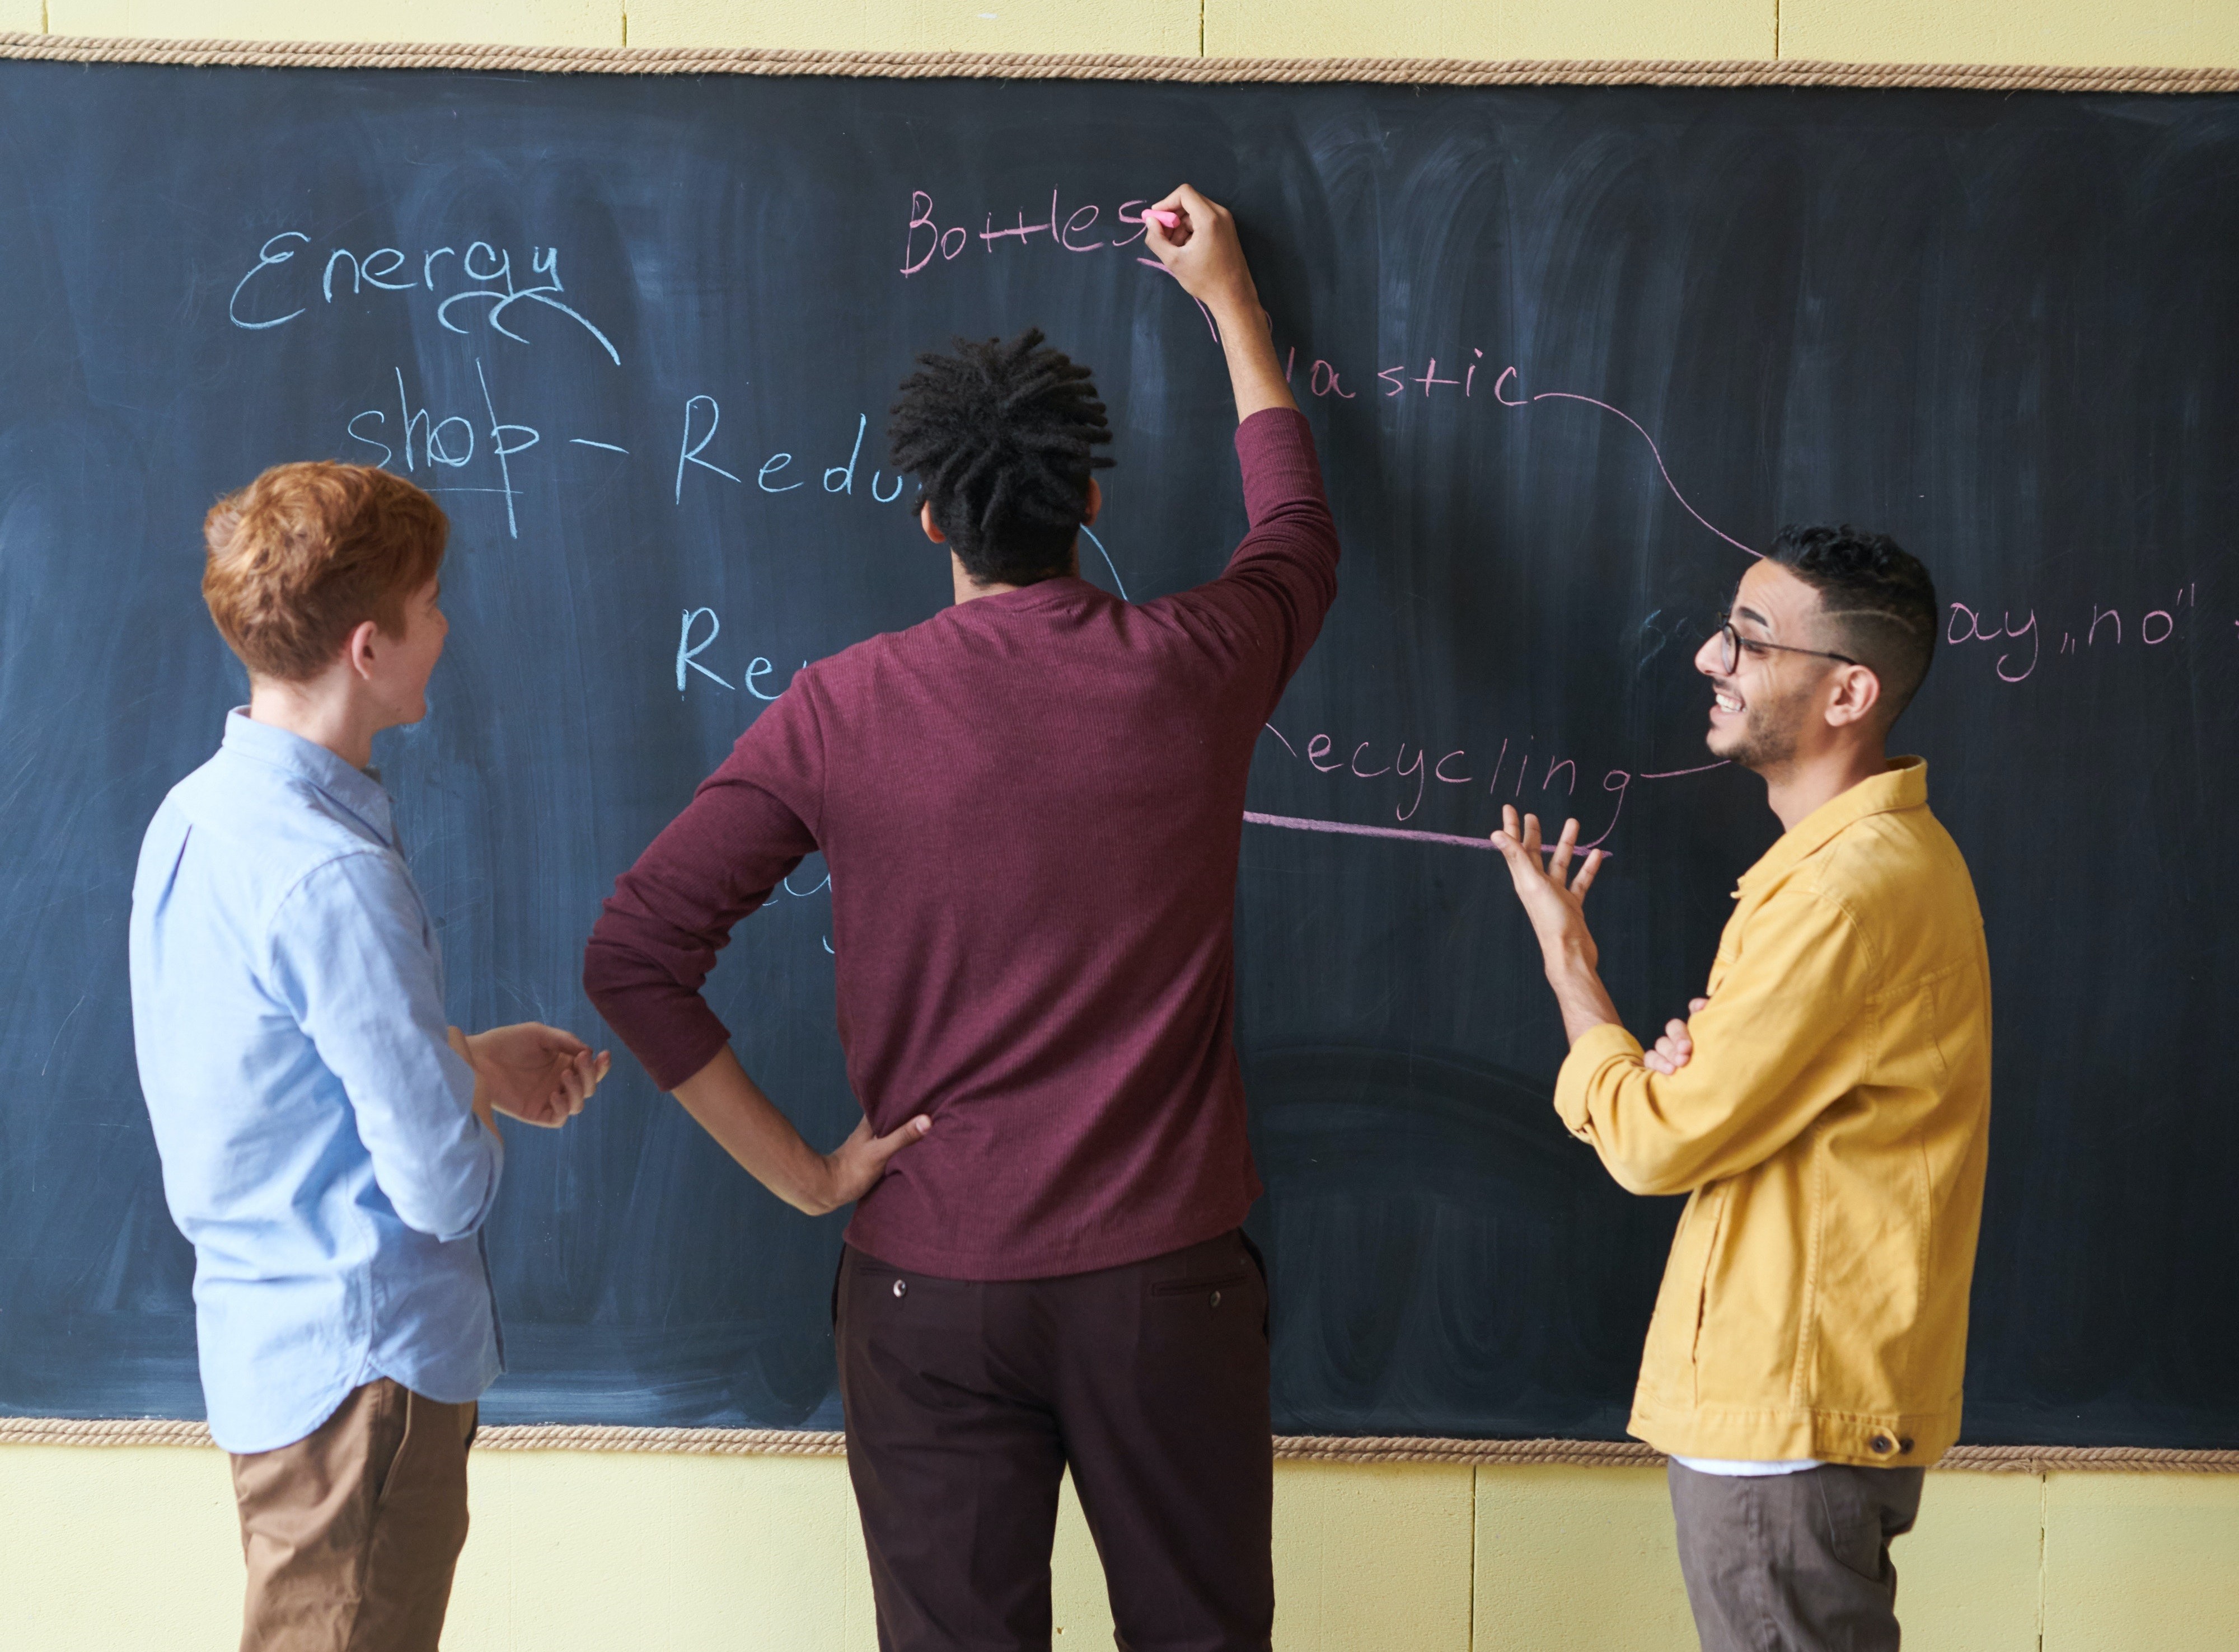 Three men stand facing a blackboard, brainstorming energy-related topics.